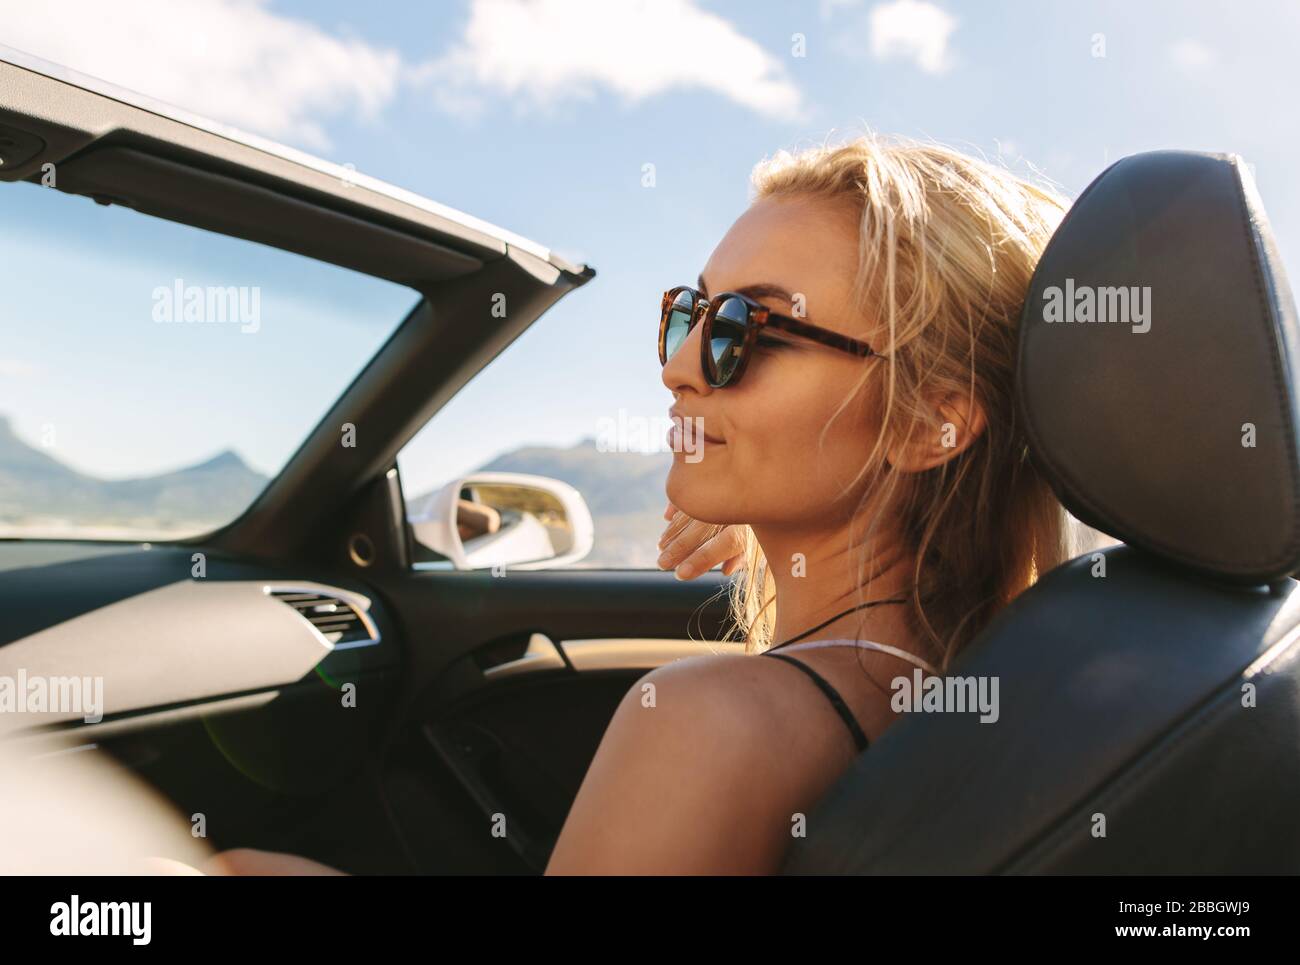 Woman on roadtrip travelling by a car. Caucasian female wearing sunglasses sitting relaxed in the passenger seat of a convertible car. Stock Photo